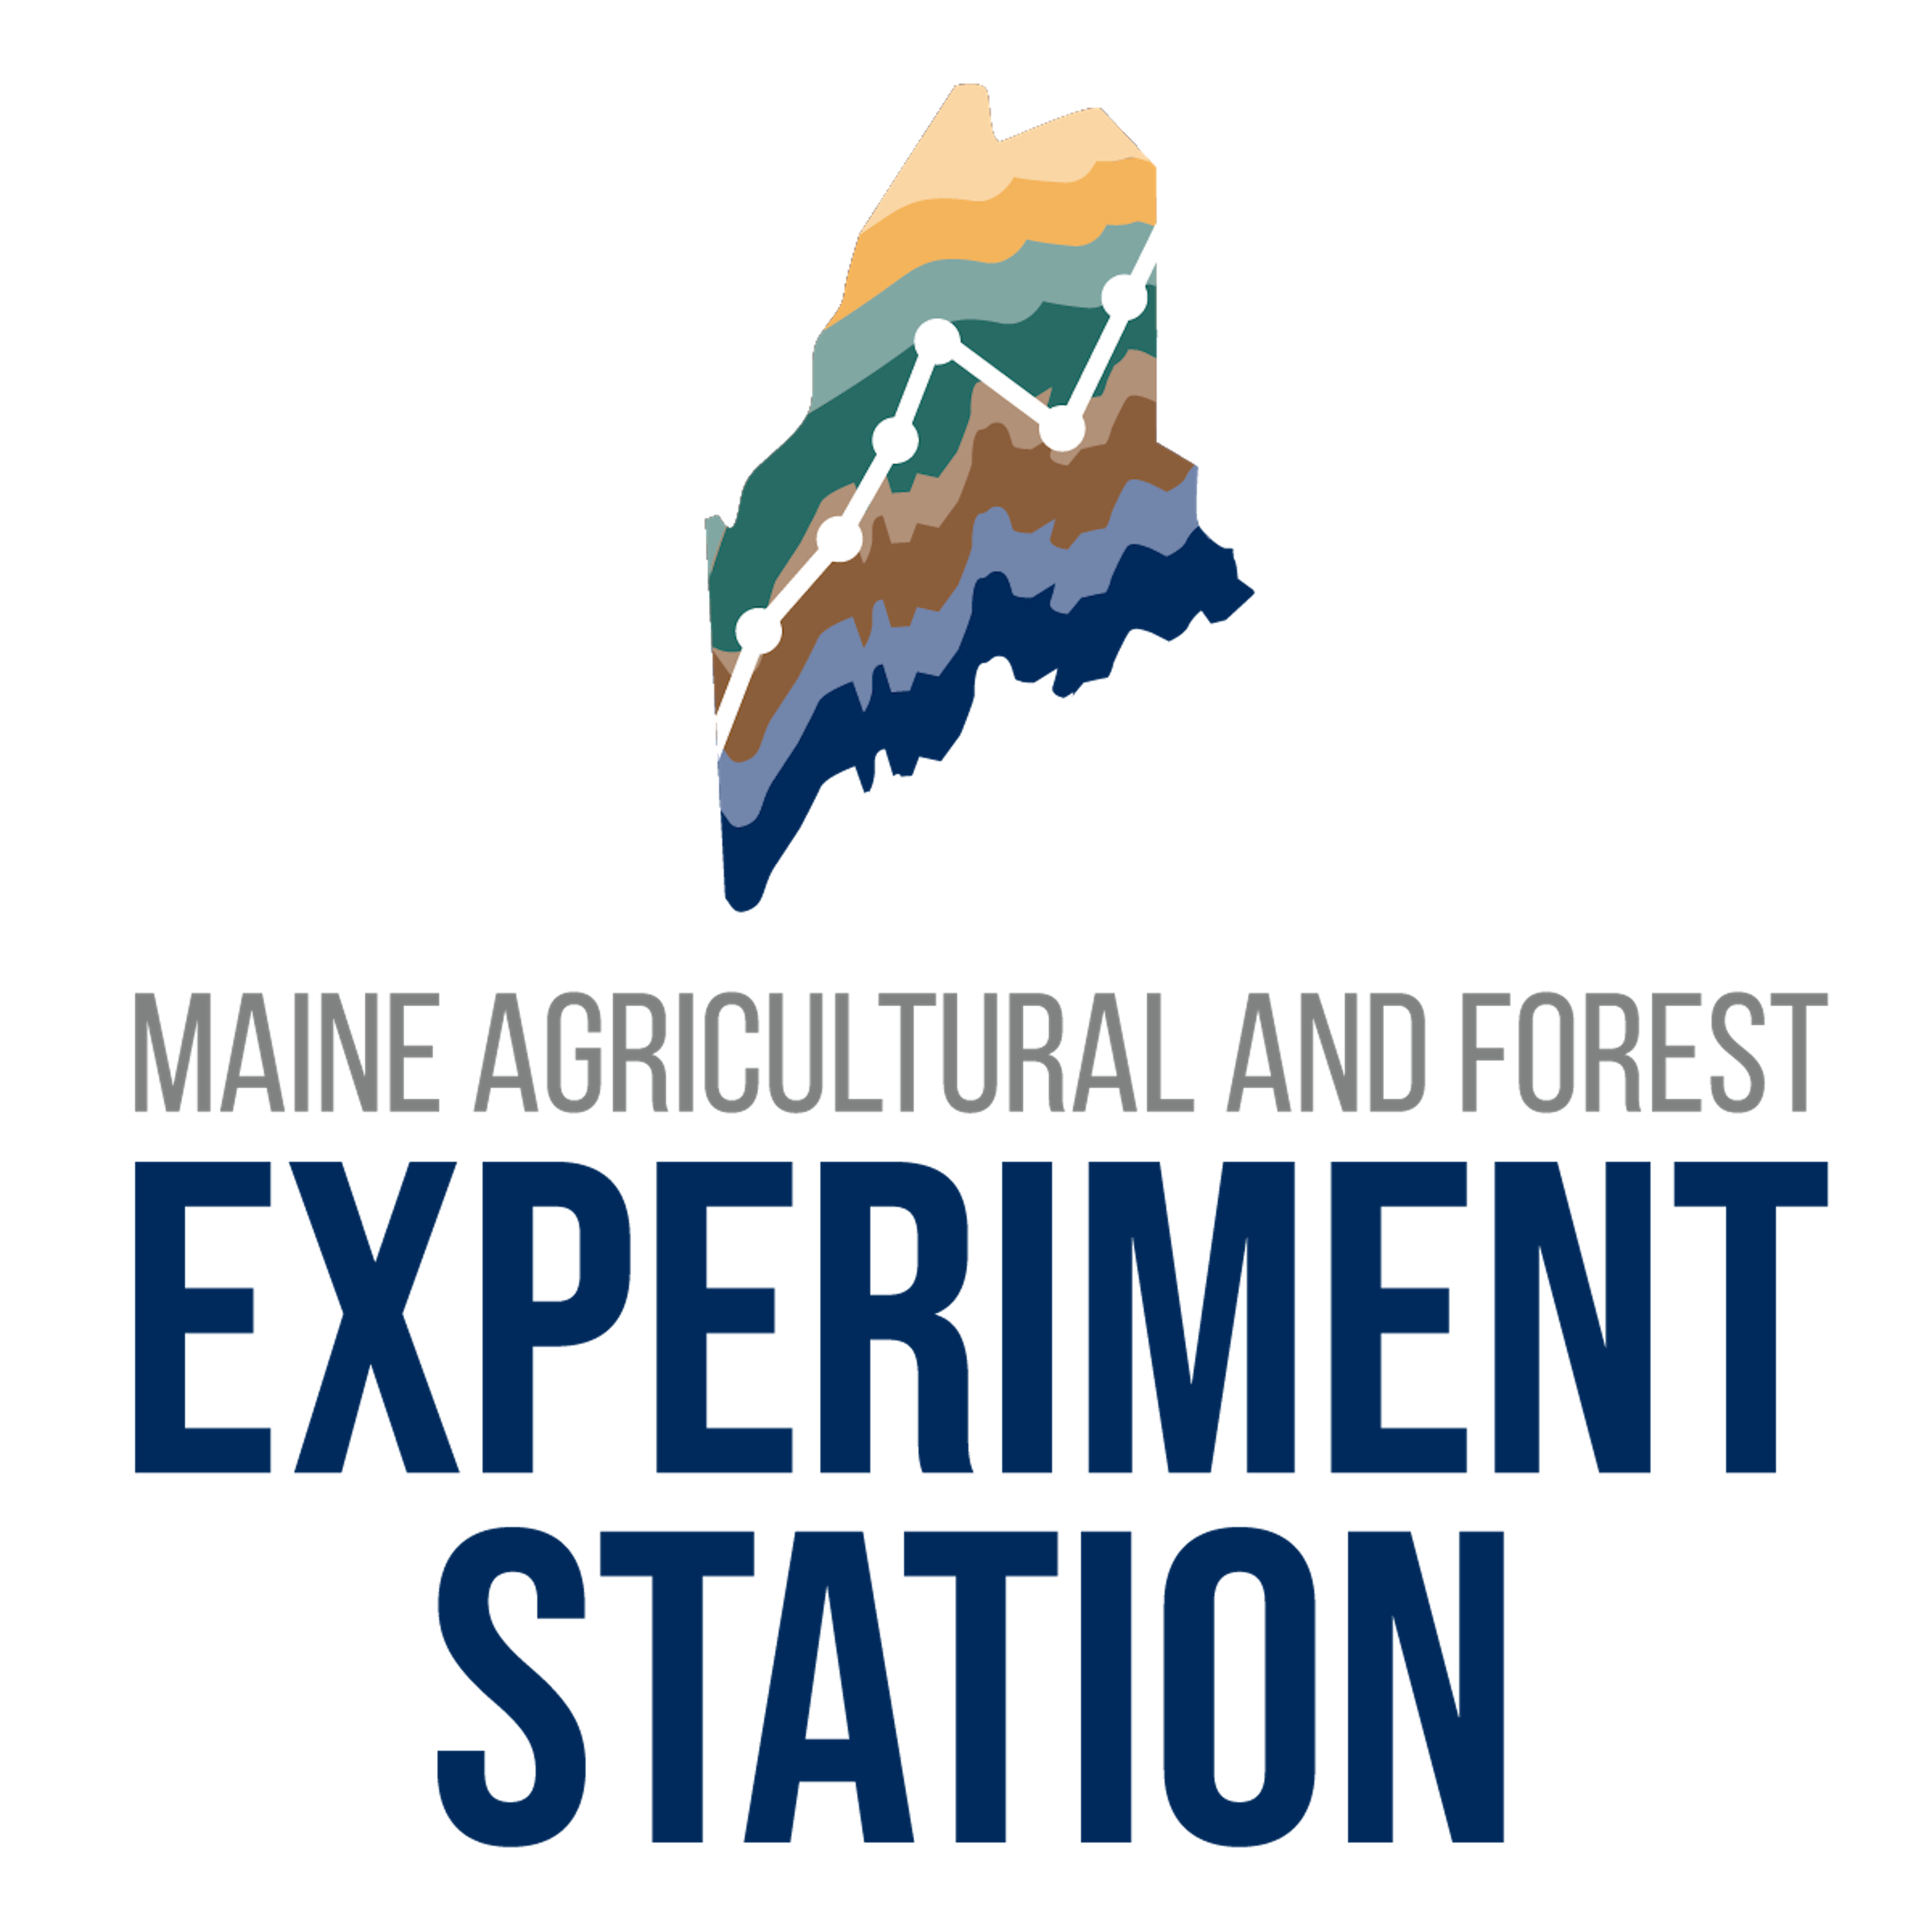 Graphic mark for UMaine's Maine Agricultural and Forest Experiment Station in vertical format